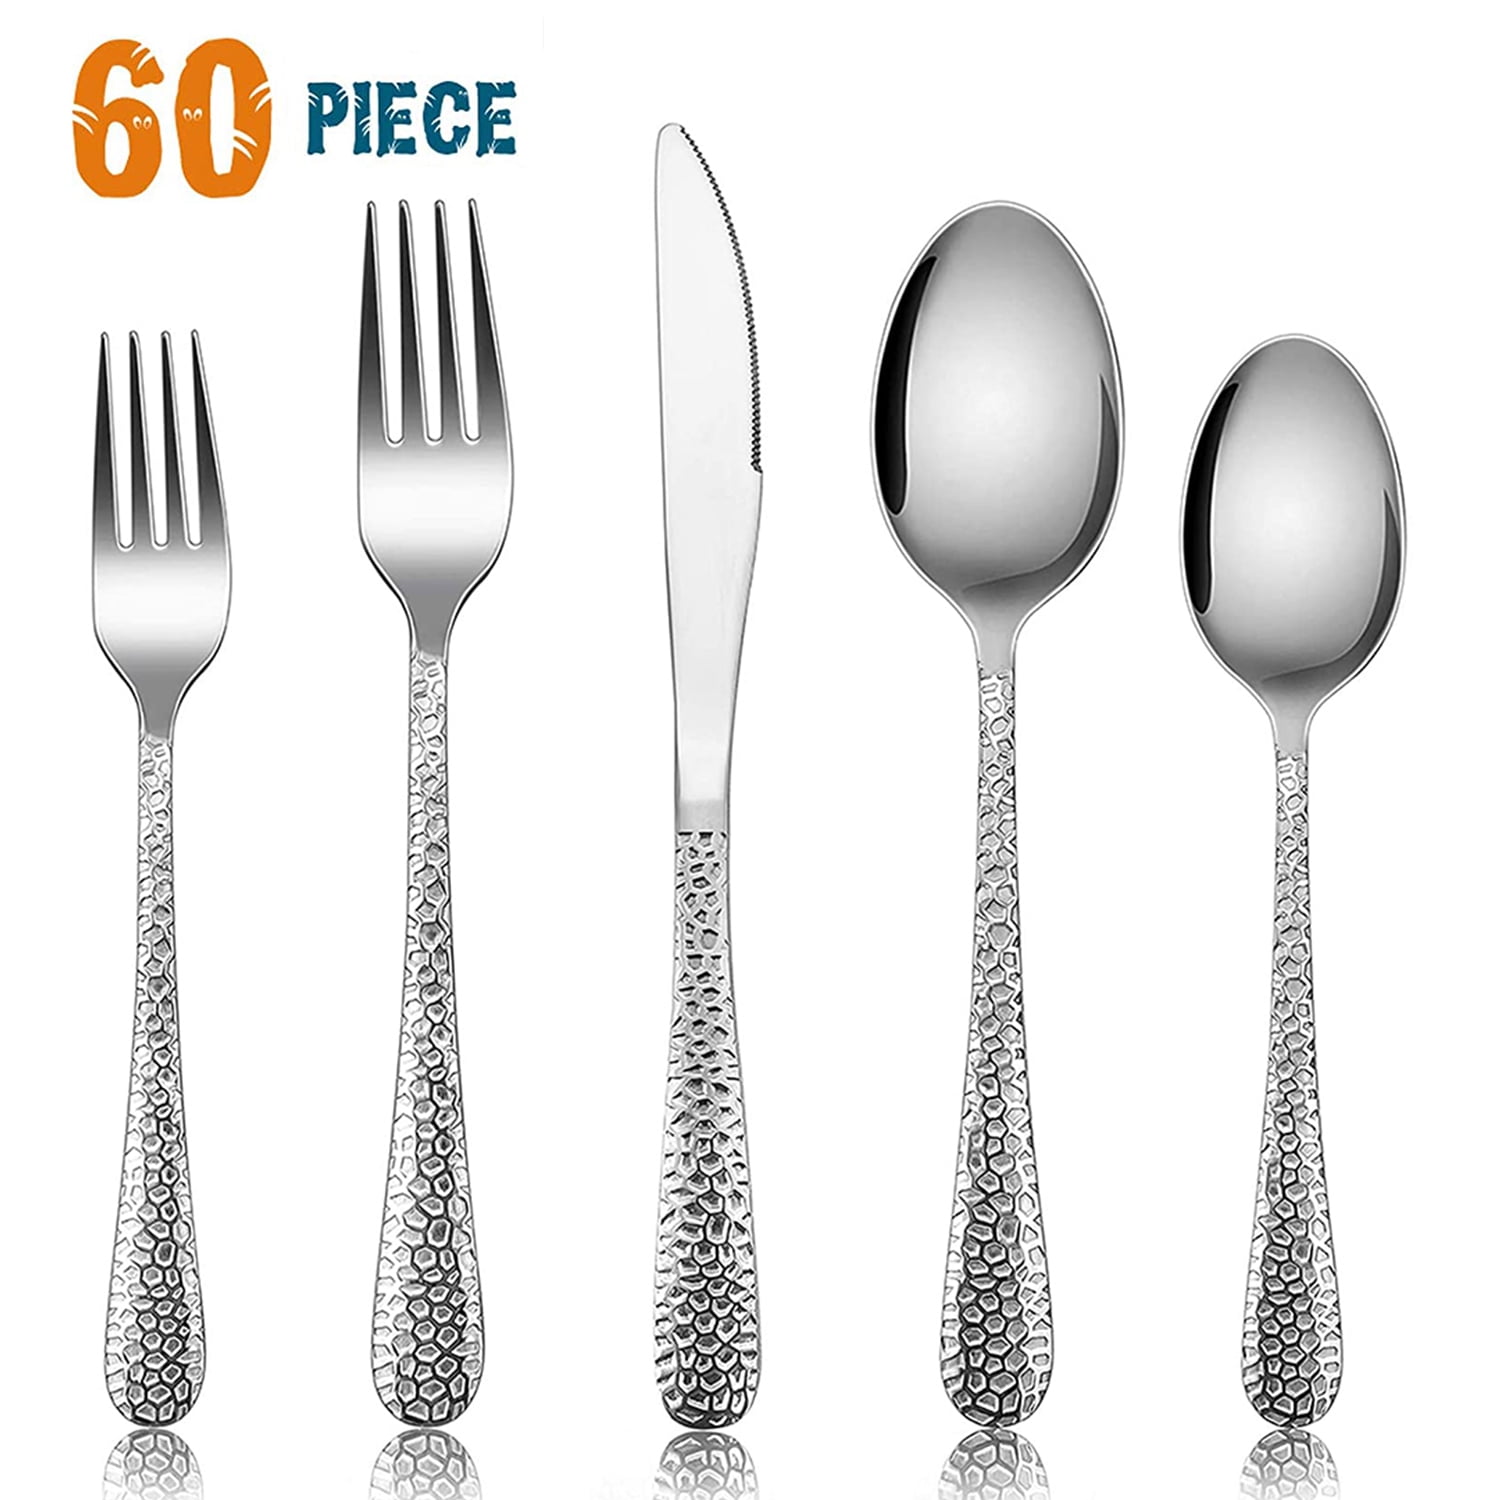 Thyme & Table 20-Piece Cutlery Set Only $20 on Walmart.com